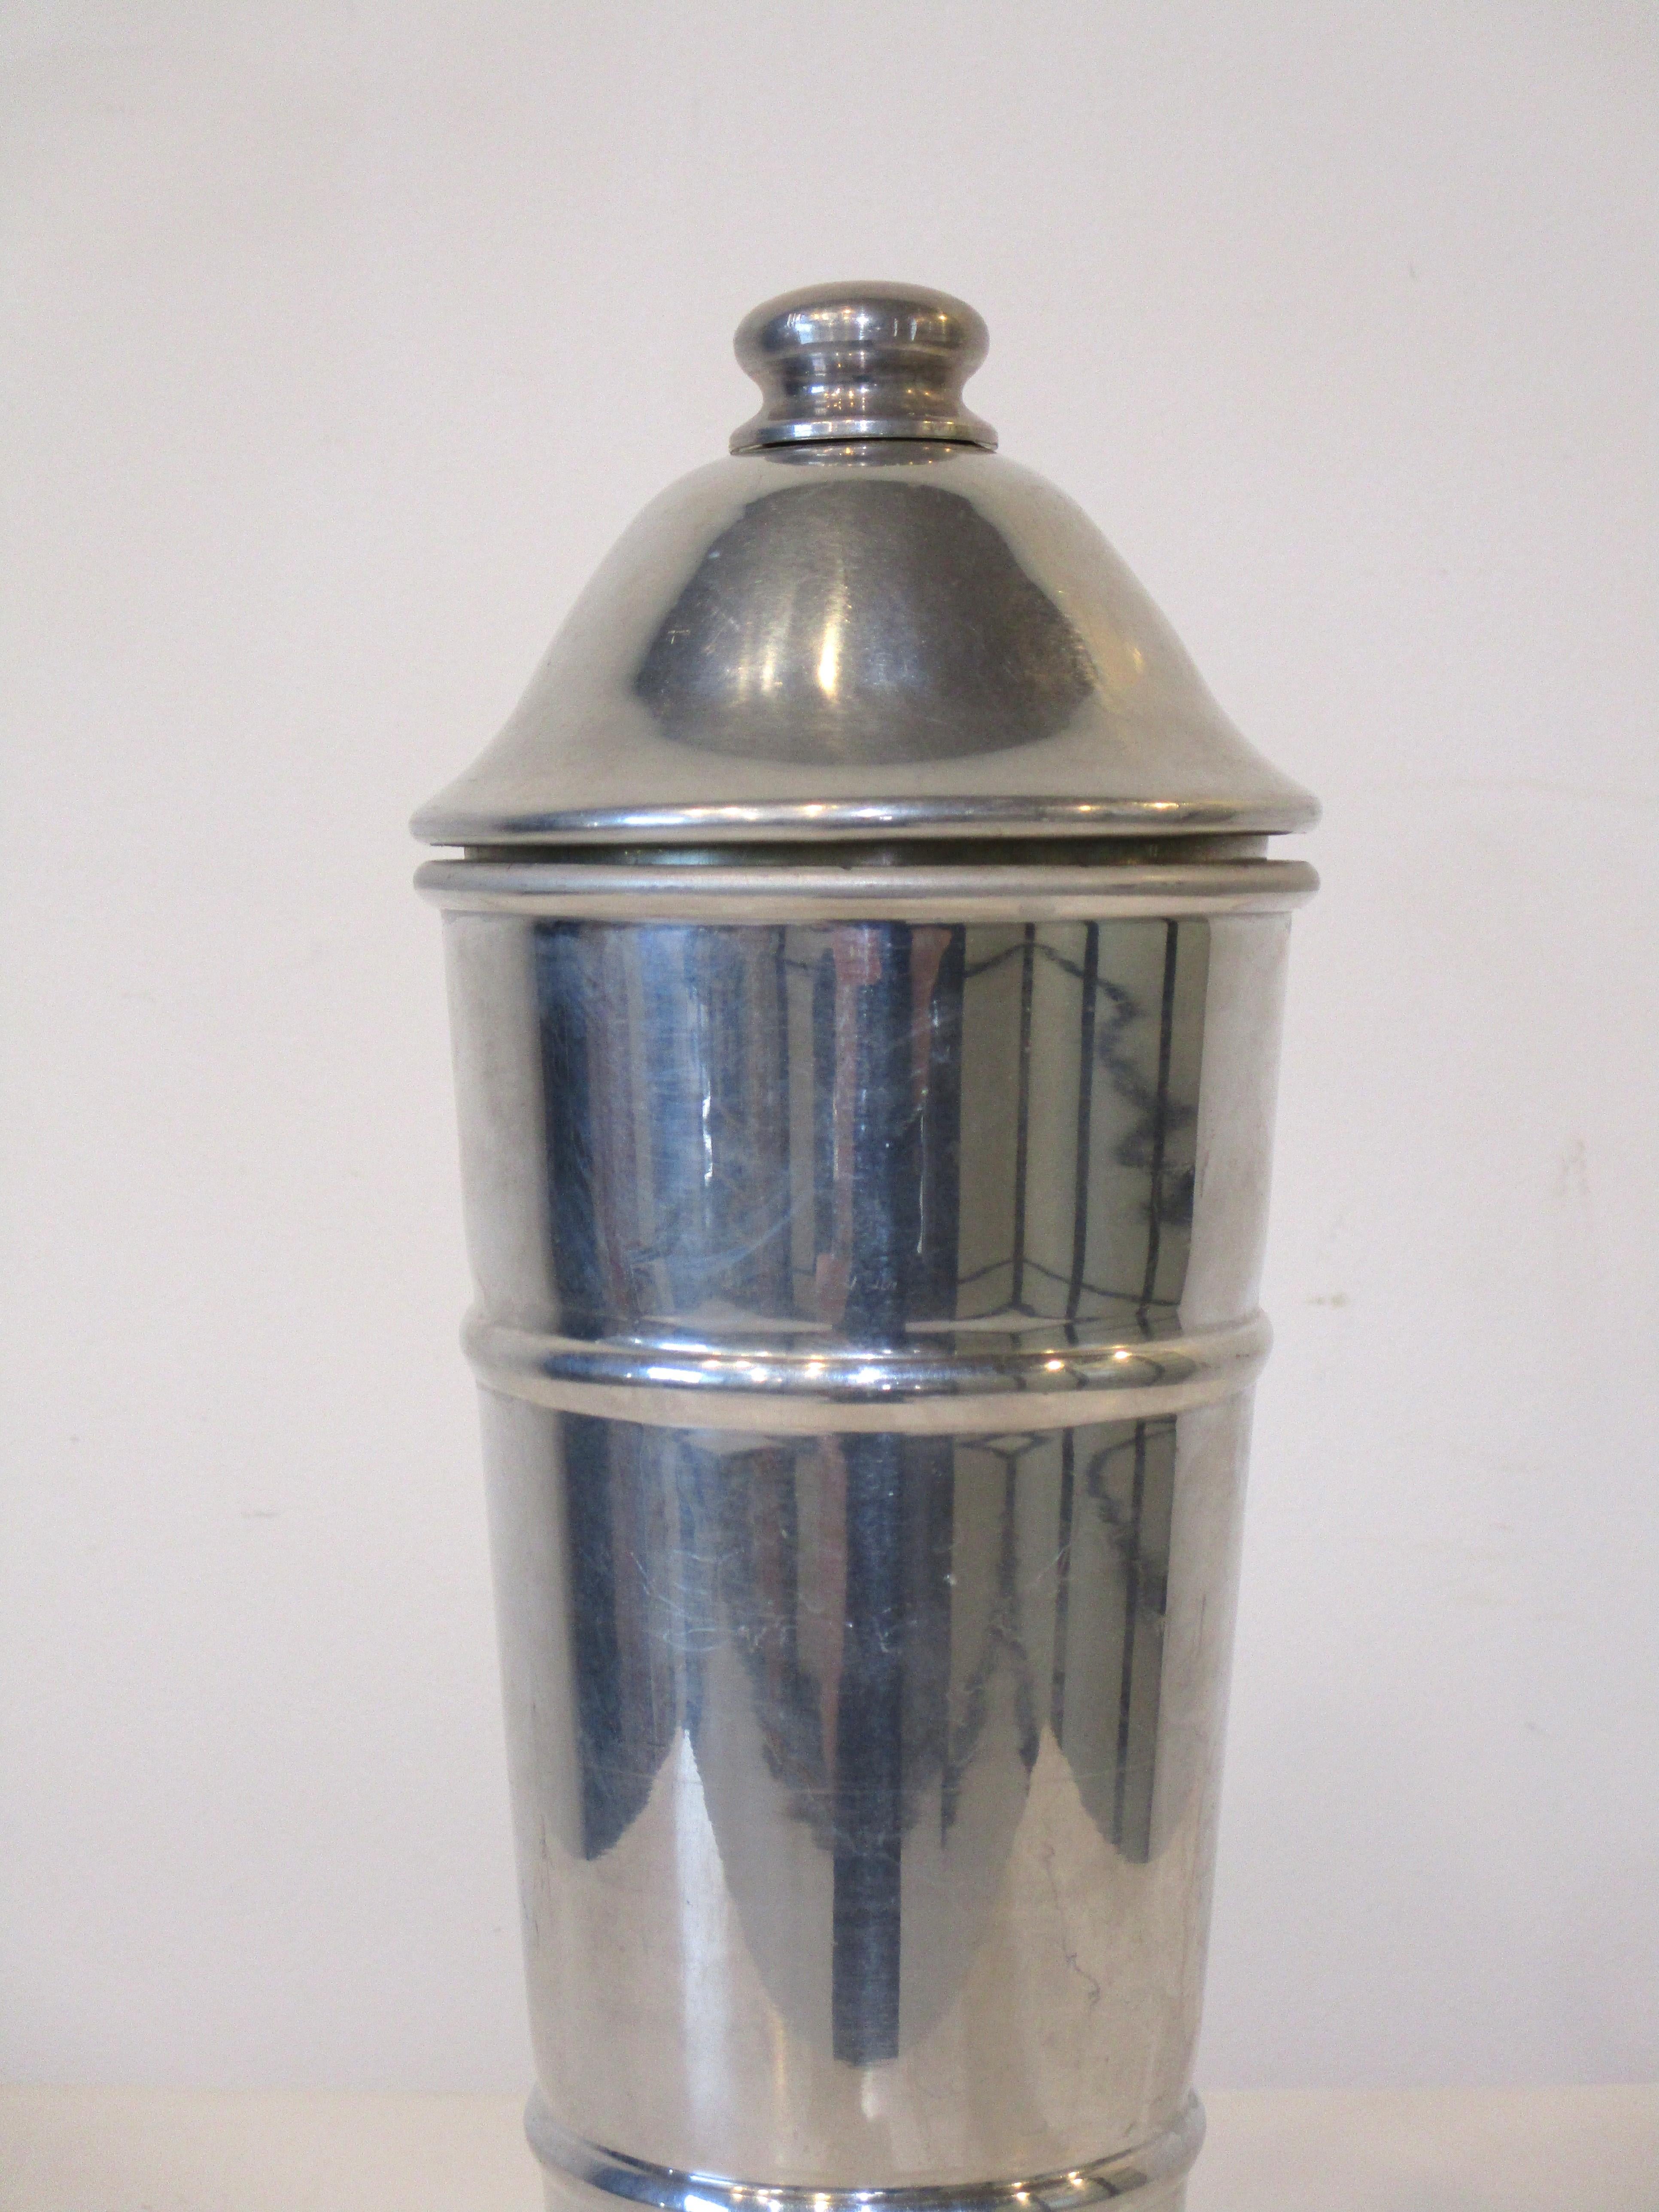 Art Deco styled ribbed aluminum cocktail shaker with built in pour inside the lid manufactured by the Kraftware metal company. A classic form from the period.